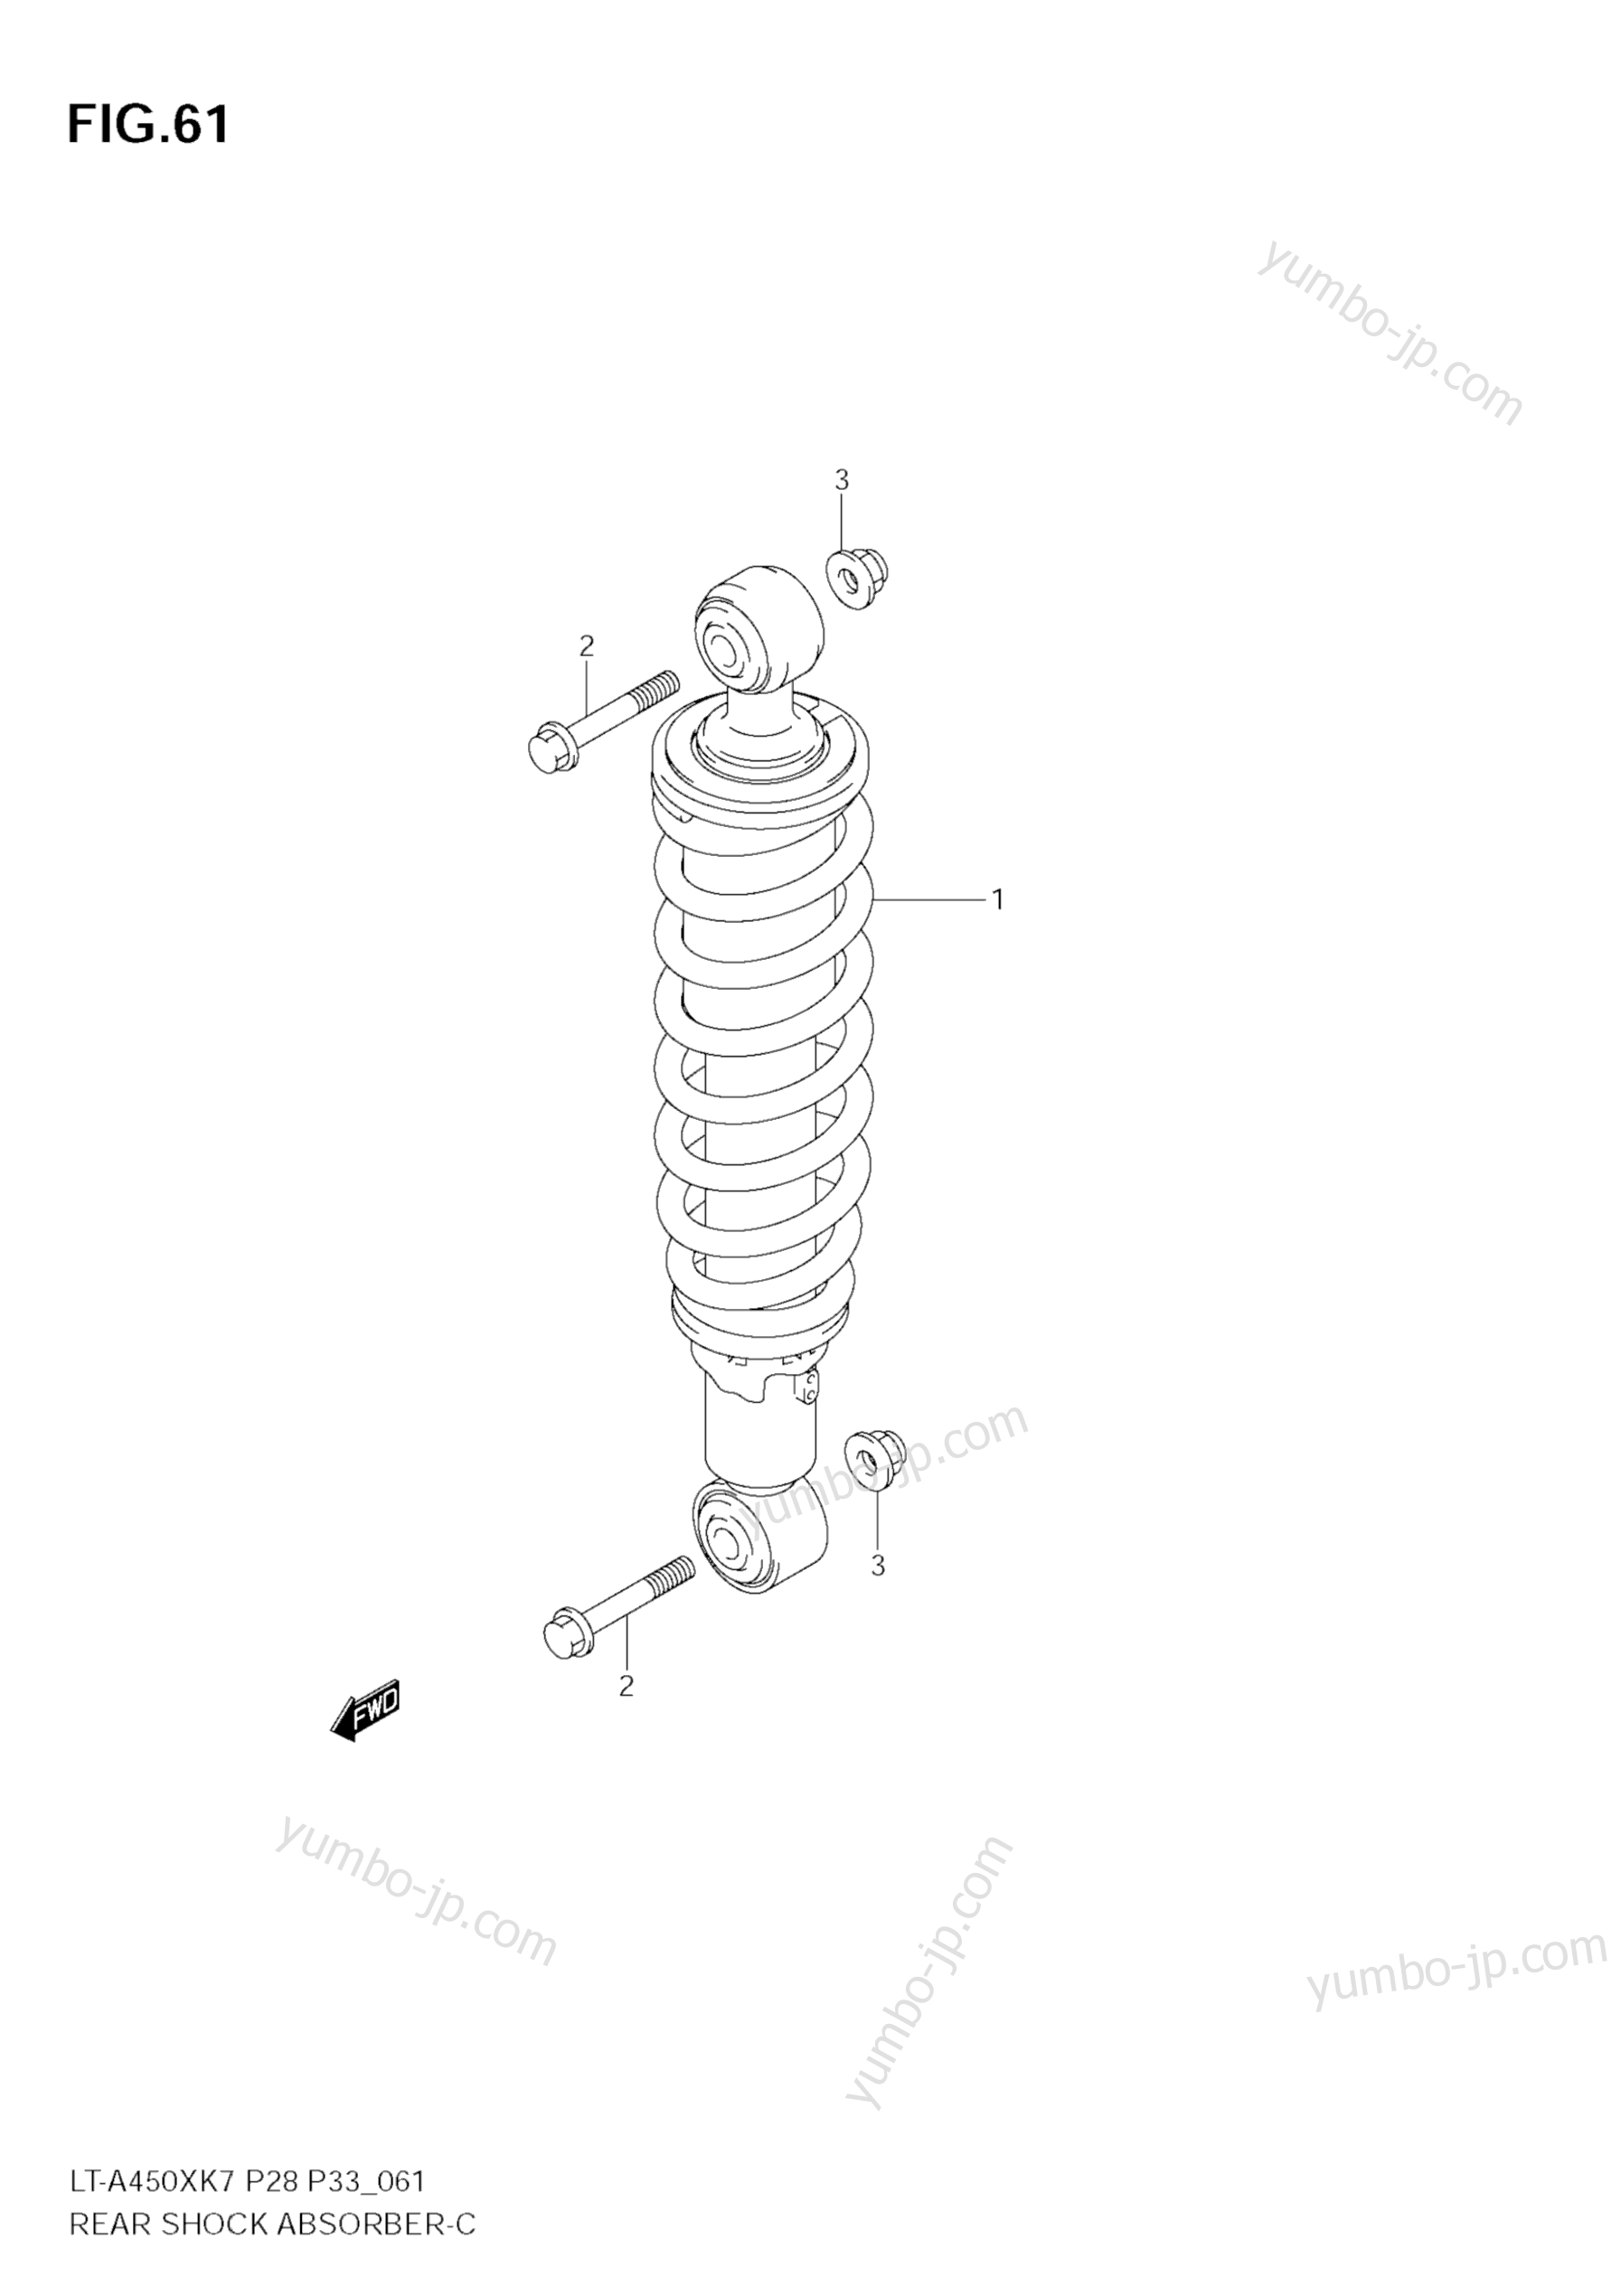 REAR SHOCK ABSORBER for ATVs SUZUKI KingQuad (LT-A450XZ) 2010 year